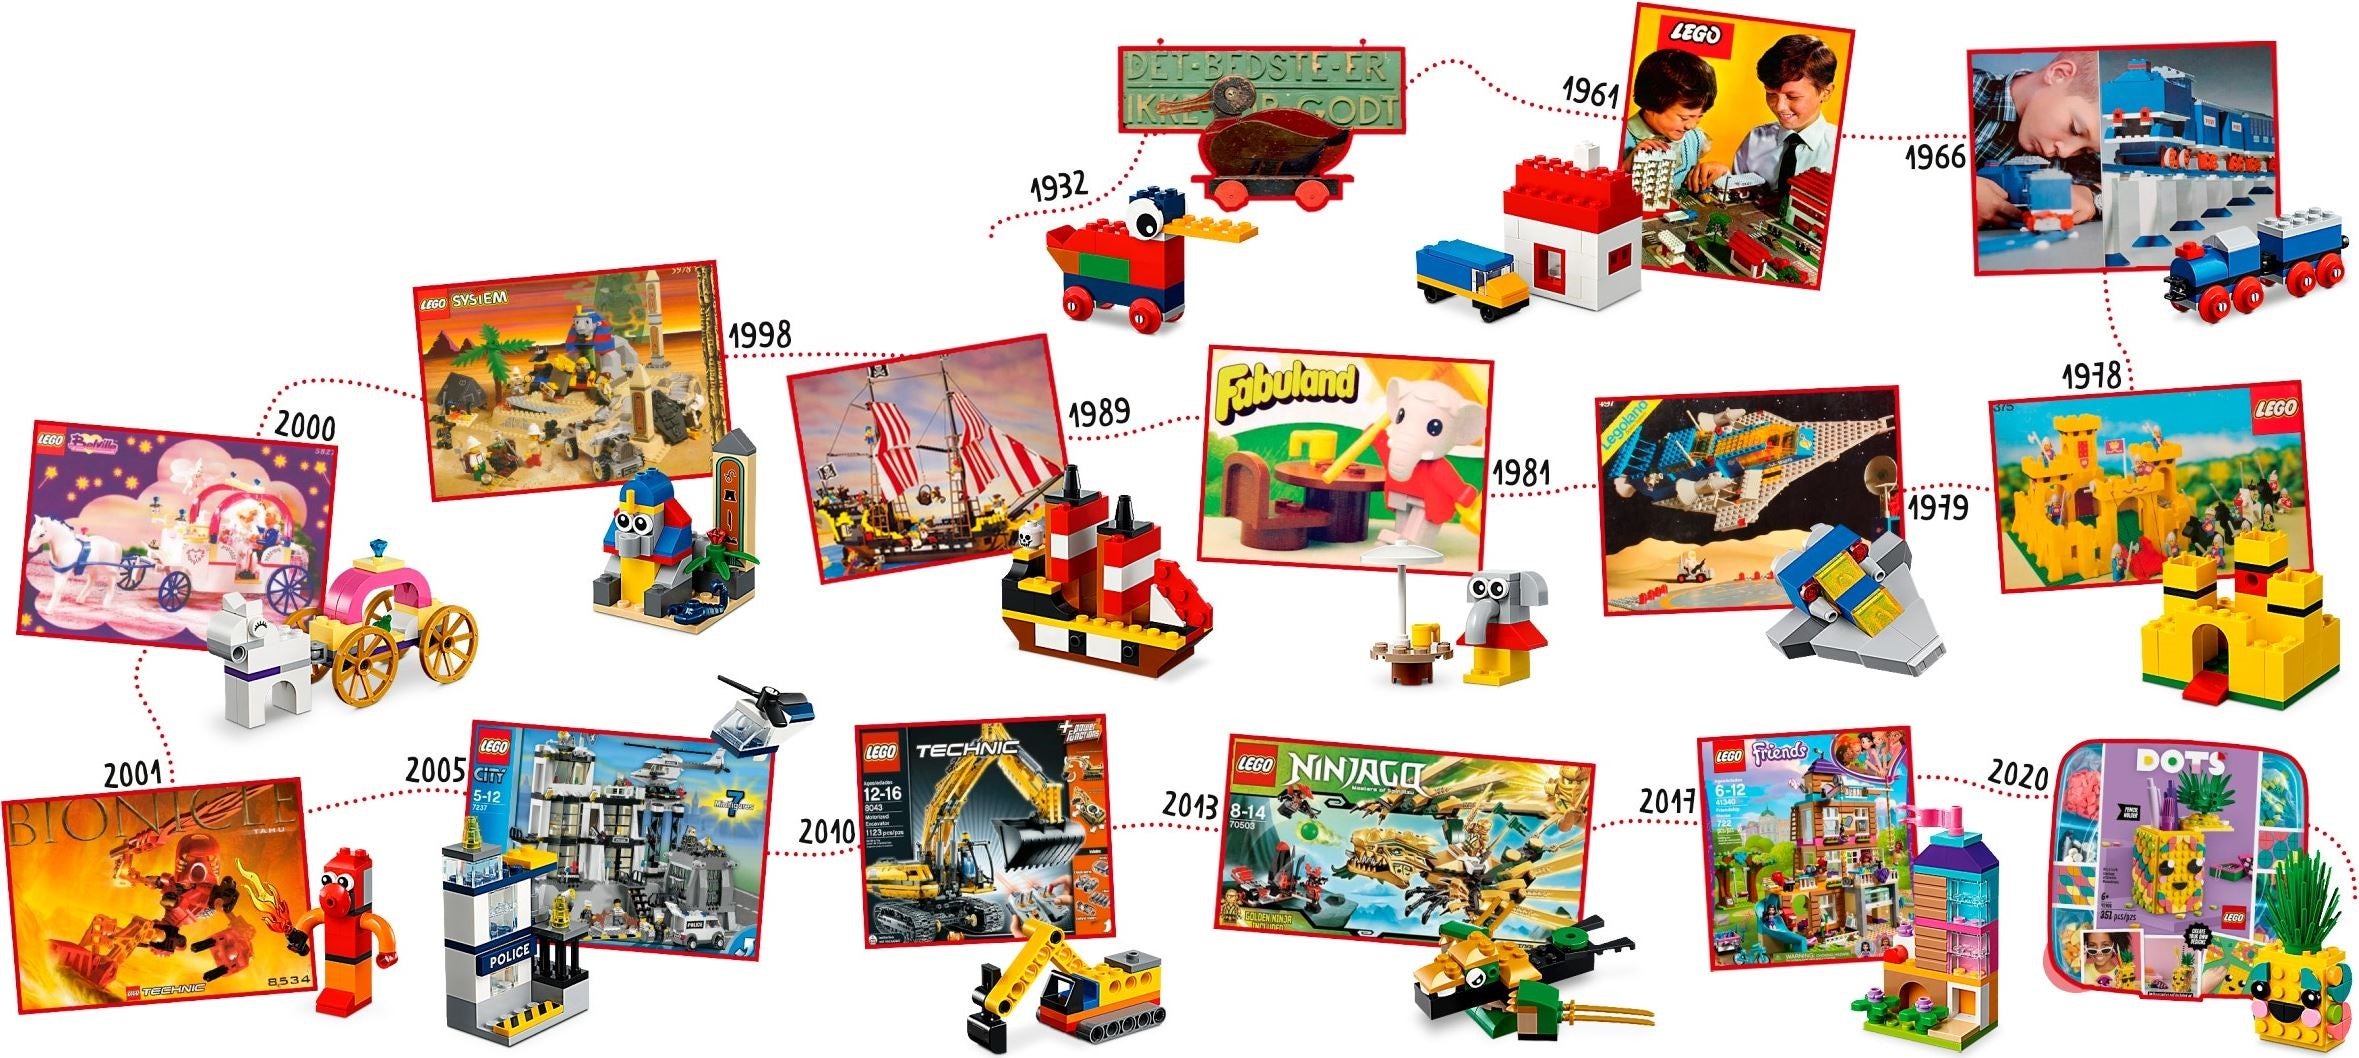 LEGO 11021 90 Years of Play